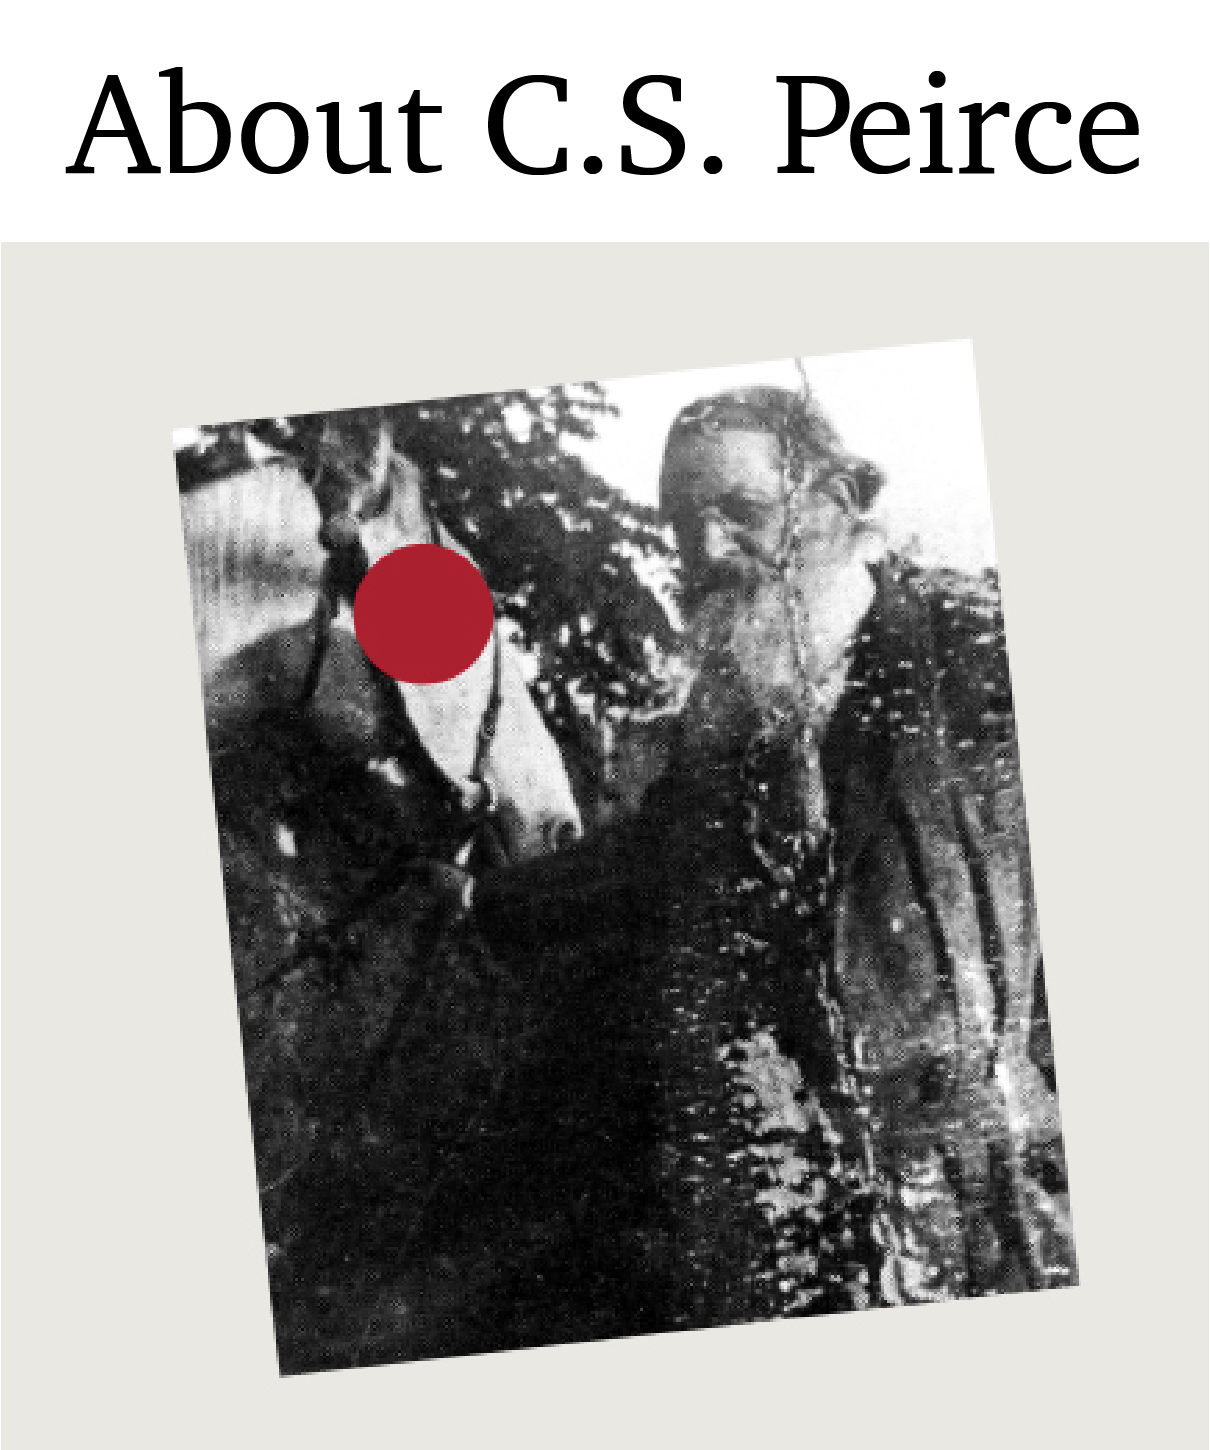 About C. S. Peirce